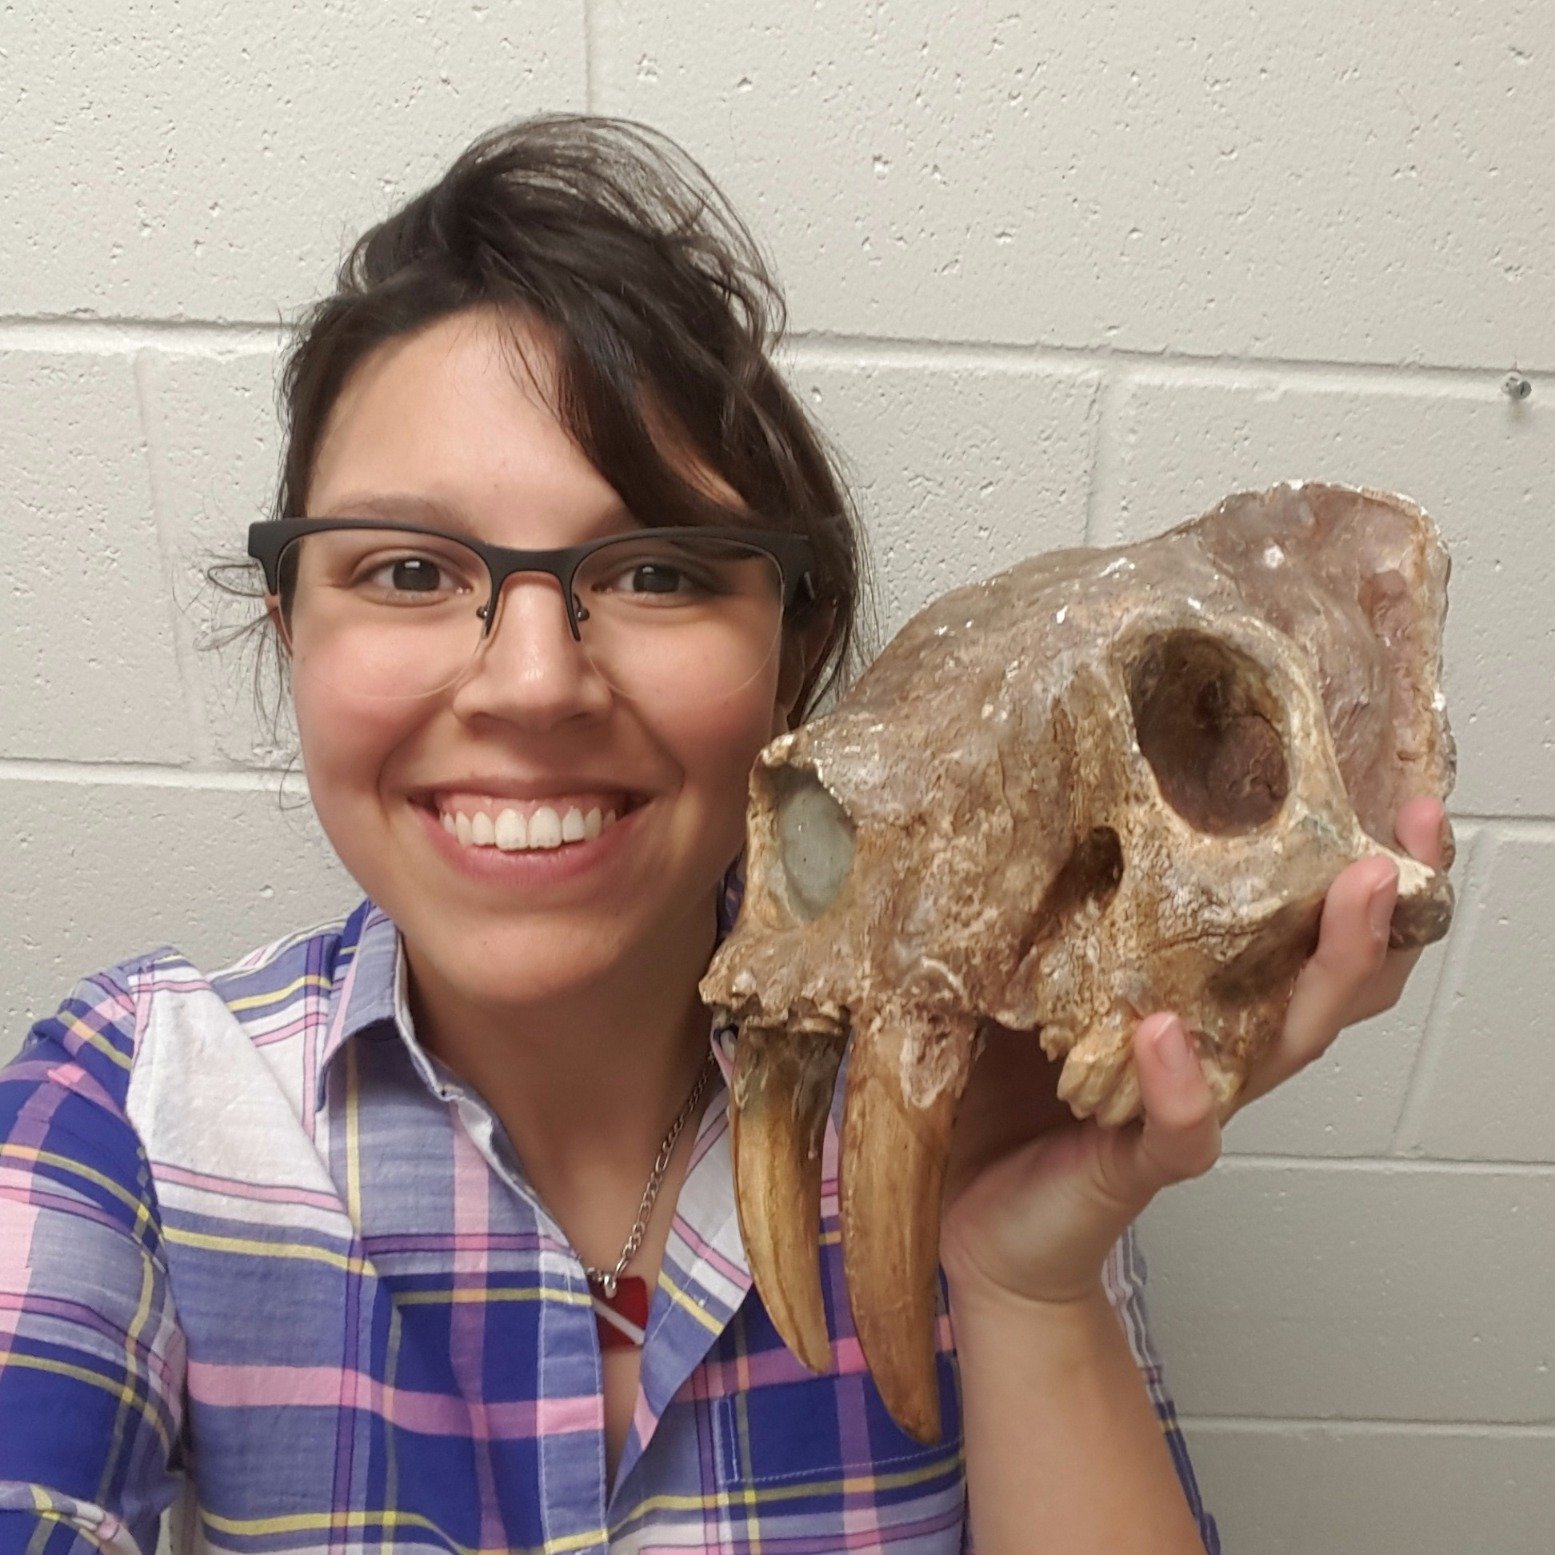 She/Her | Wildlife Forensics, Conservation Genetics, Natural History Museums, & Dogs | #femalescientist #scicomm | 👩🏽‍🔬🦏🏳️‍🌈🐶 | Tweets are my own